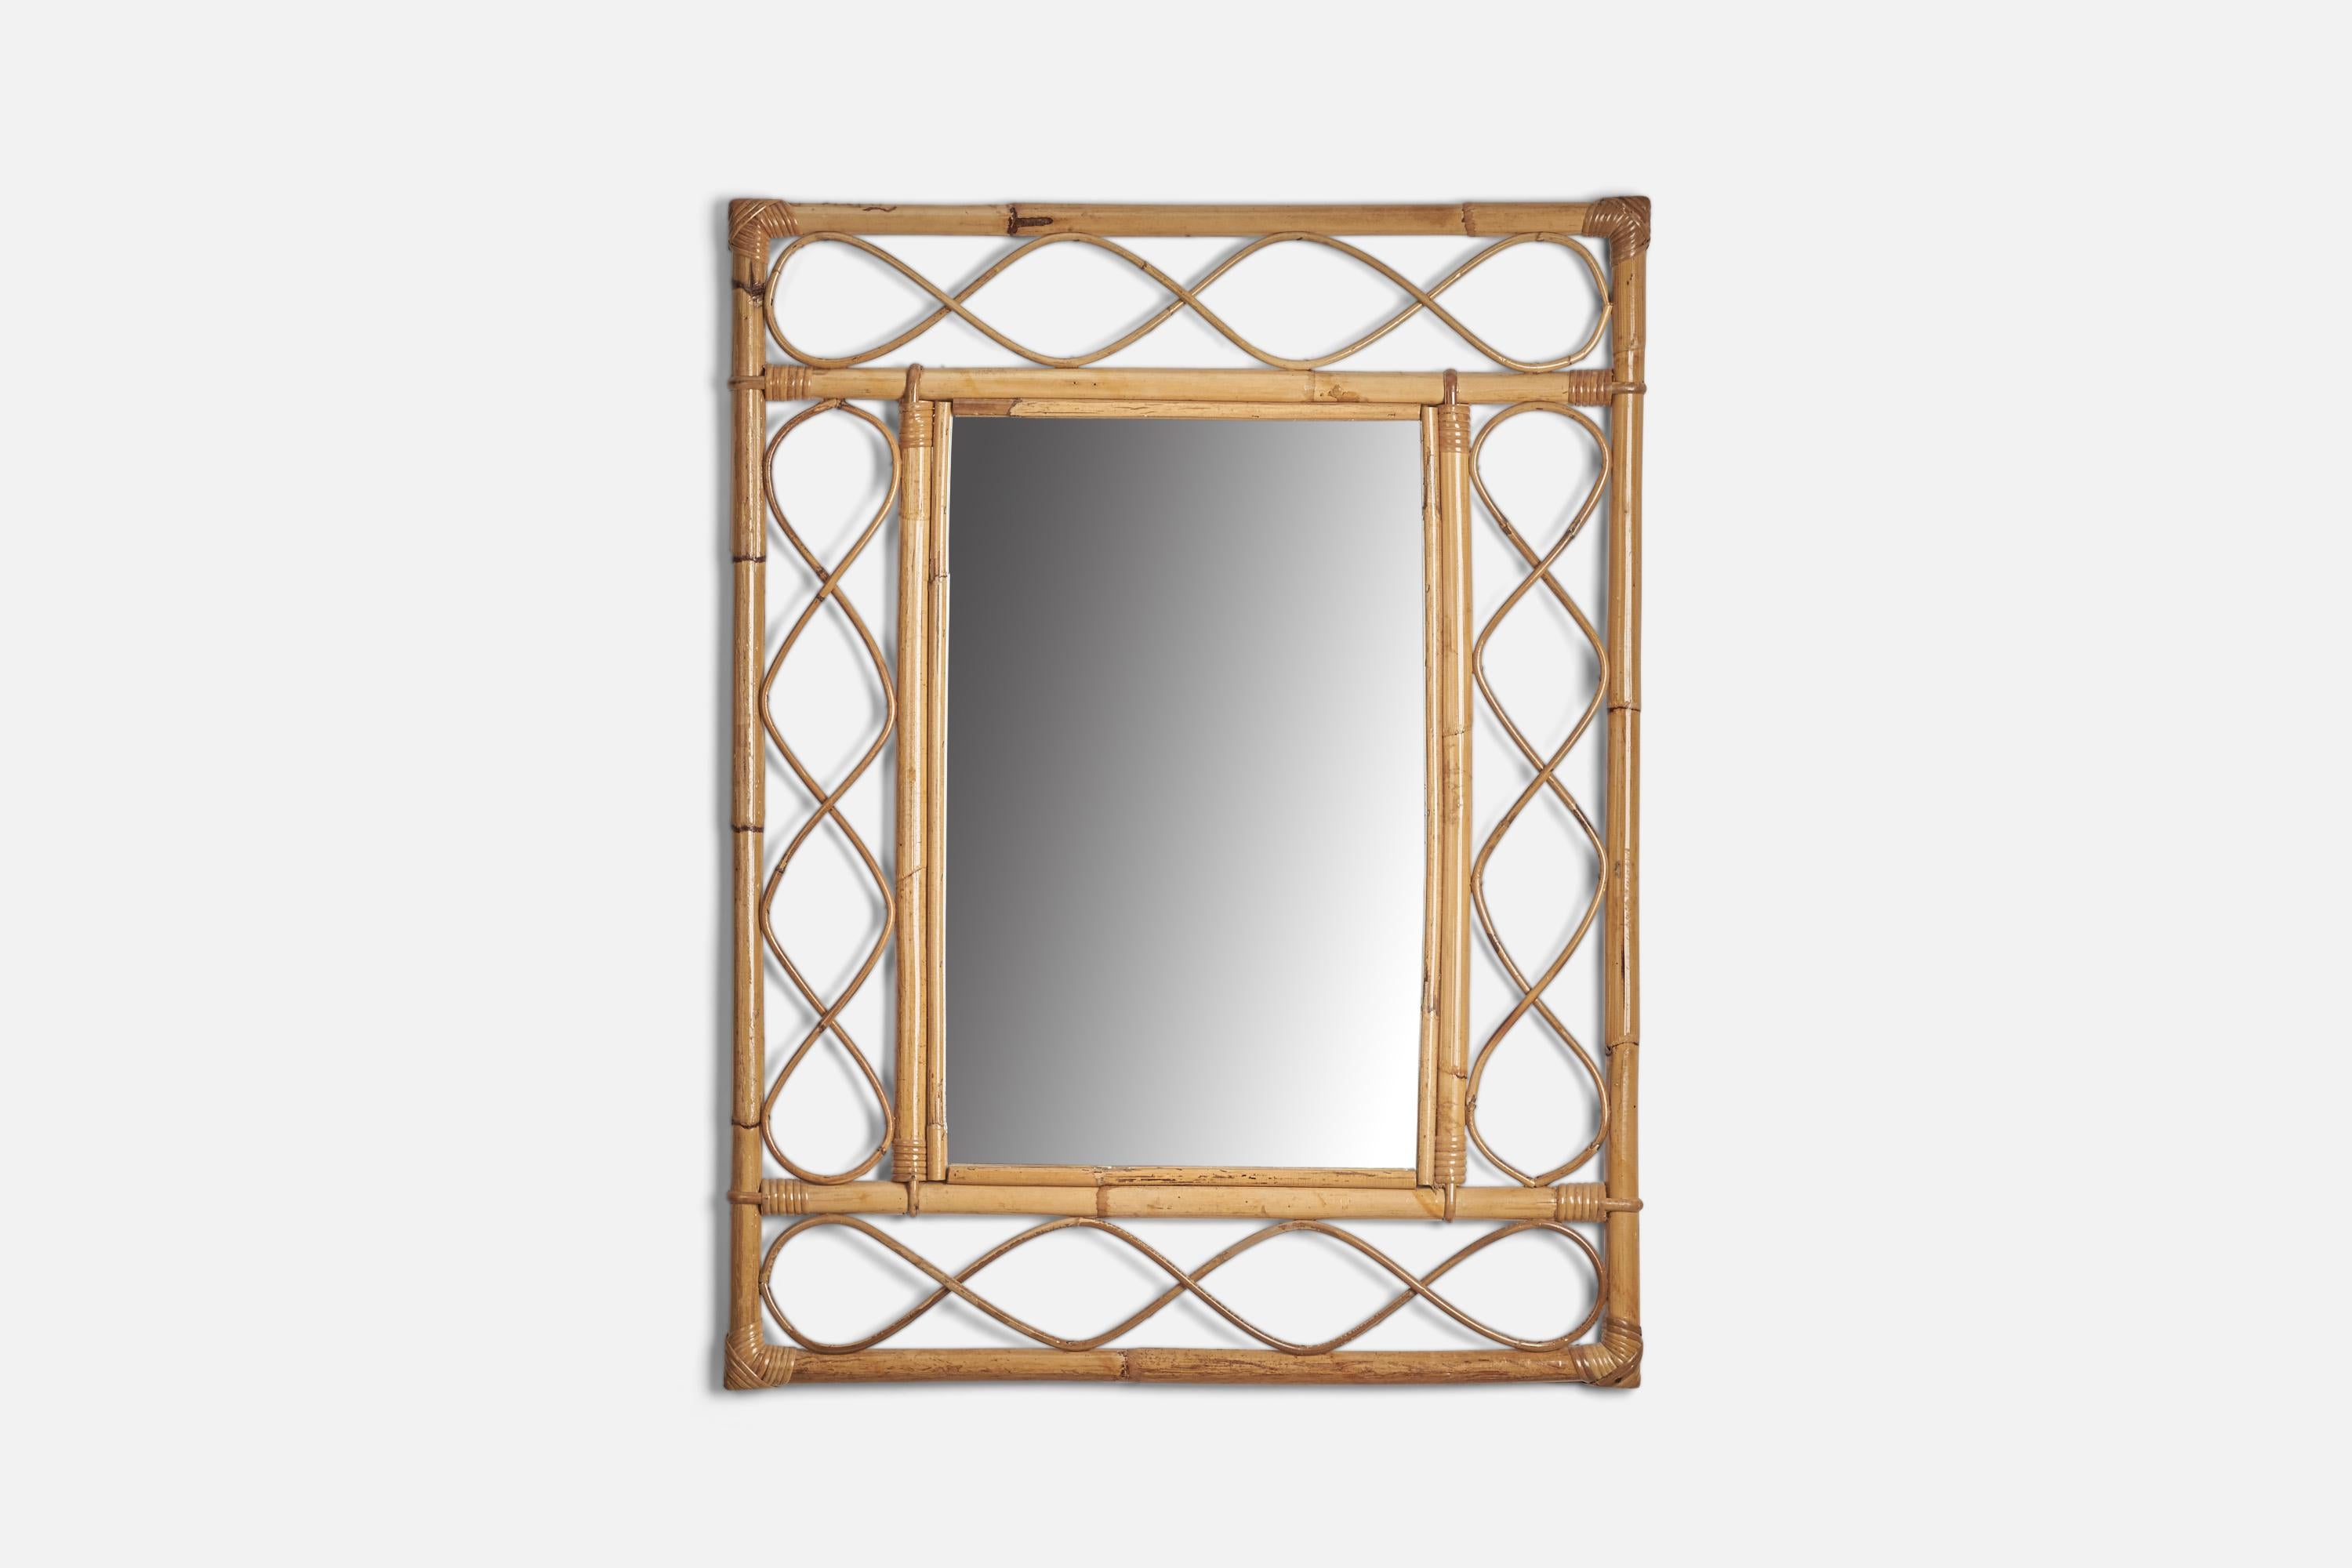 A rattan, bamboo wall mirror designed and produced by an Italian Designer, Italy, 1960s.